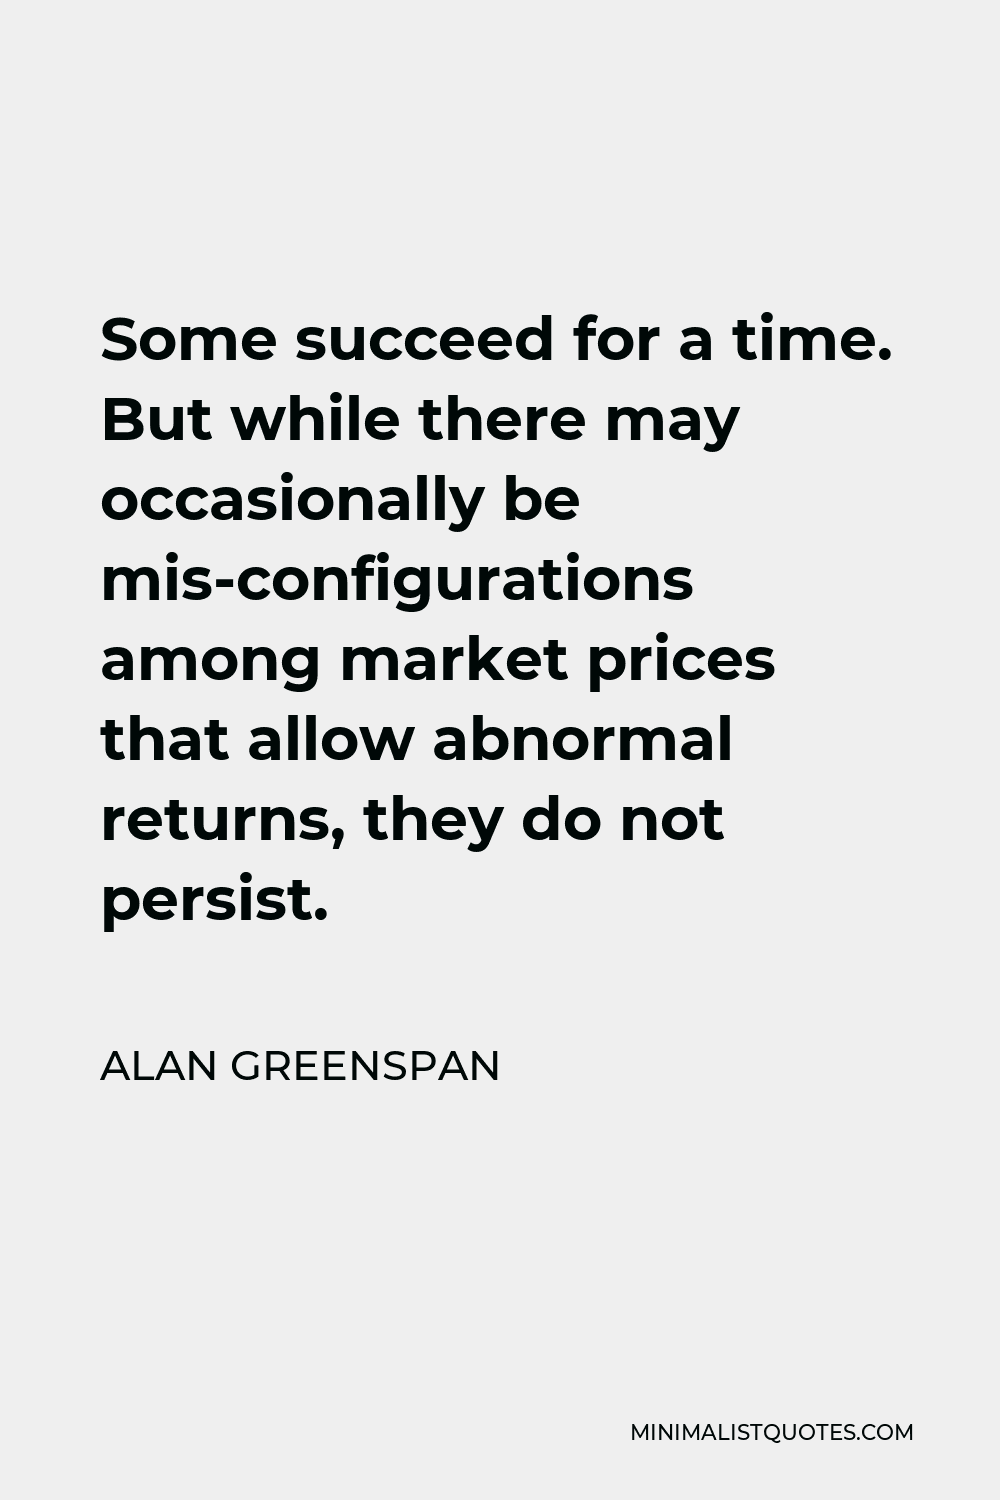 Alan Greenspan Quote - Some succeed for a time. But while there may occasionally be mis-configurations among market prices that allow abnormal returns, they do not persist.